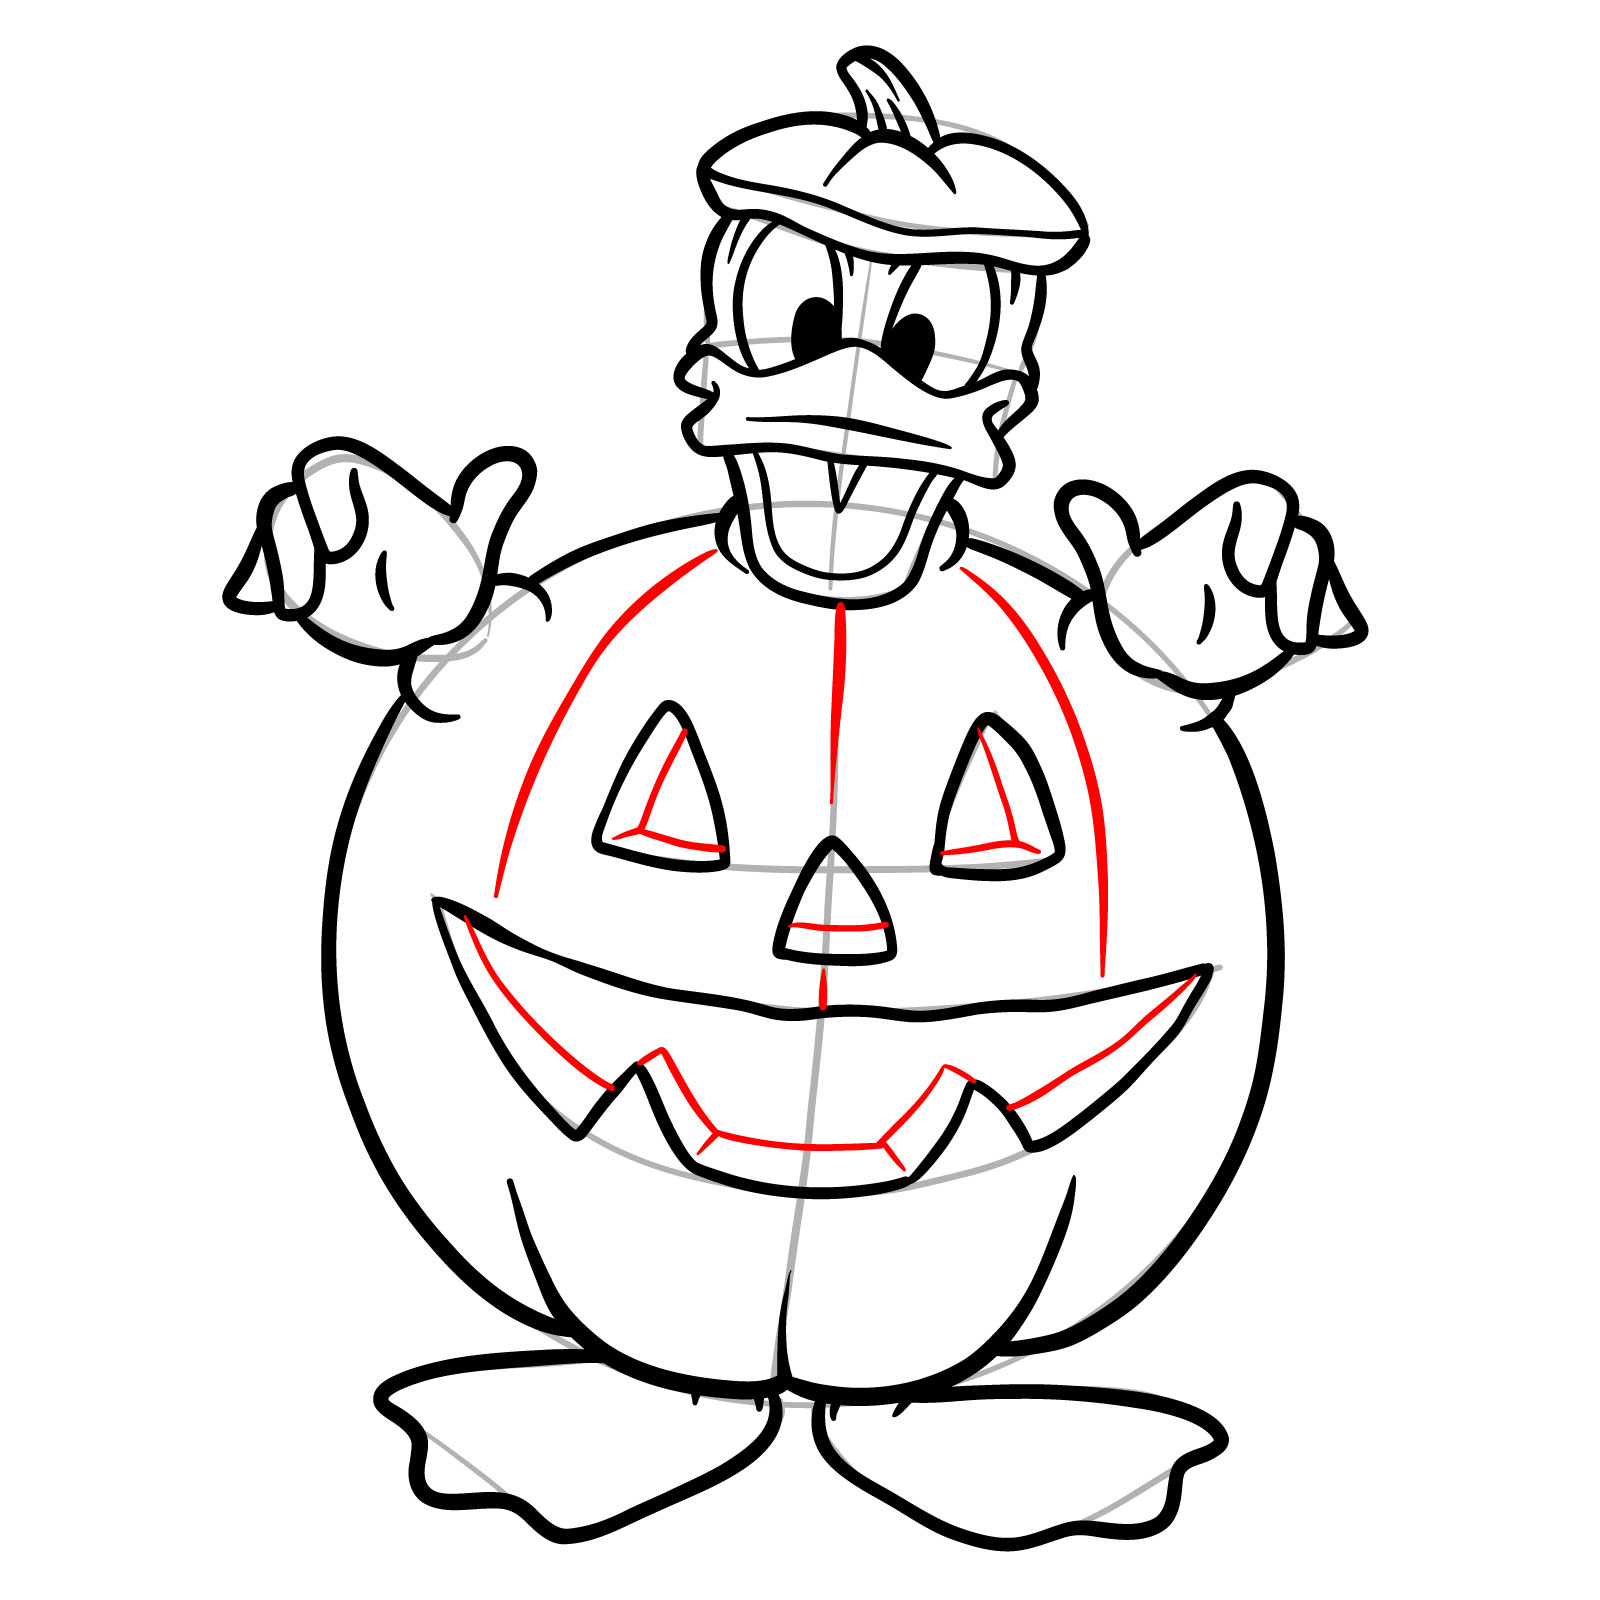 How to draw Halloween Donald Duck in a jack o'lantern - step 23